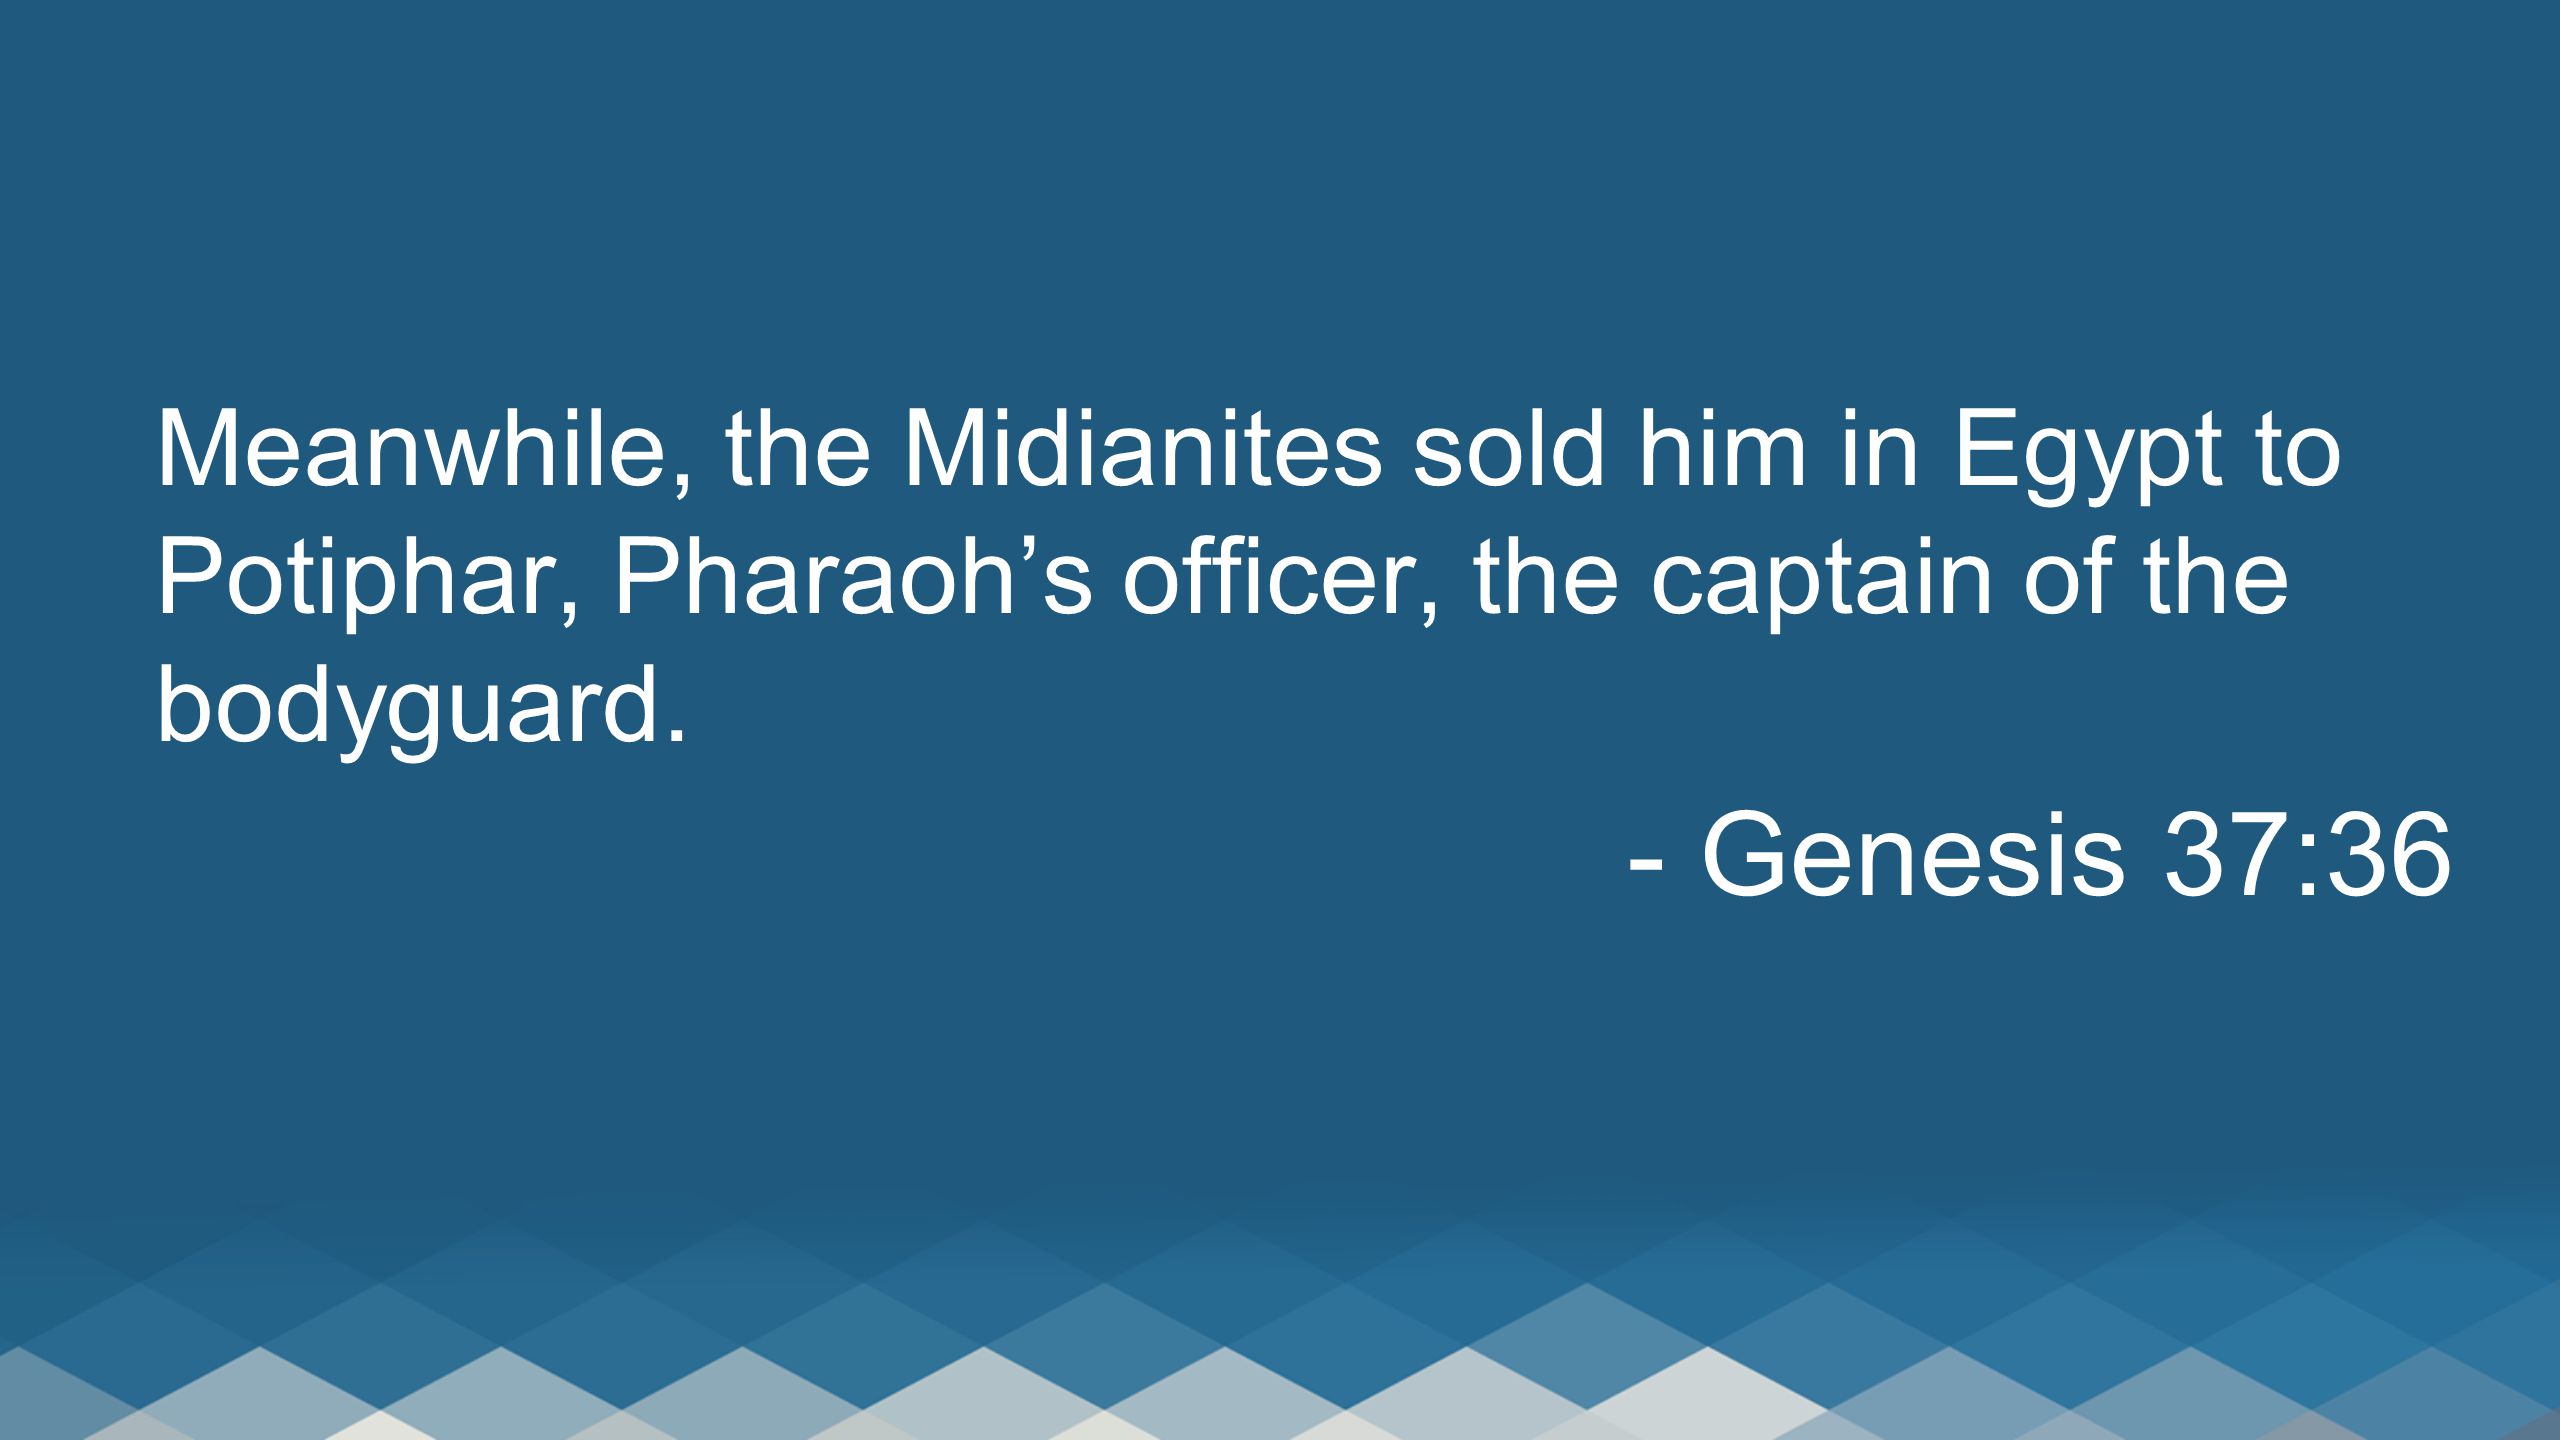 Meanwhile, the Midianites sold him in Egypt to Potiphar, Pharaoh’s officer, the captain of the bodyguard.